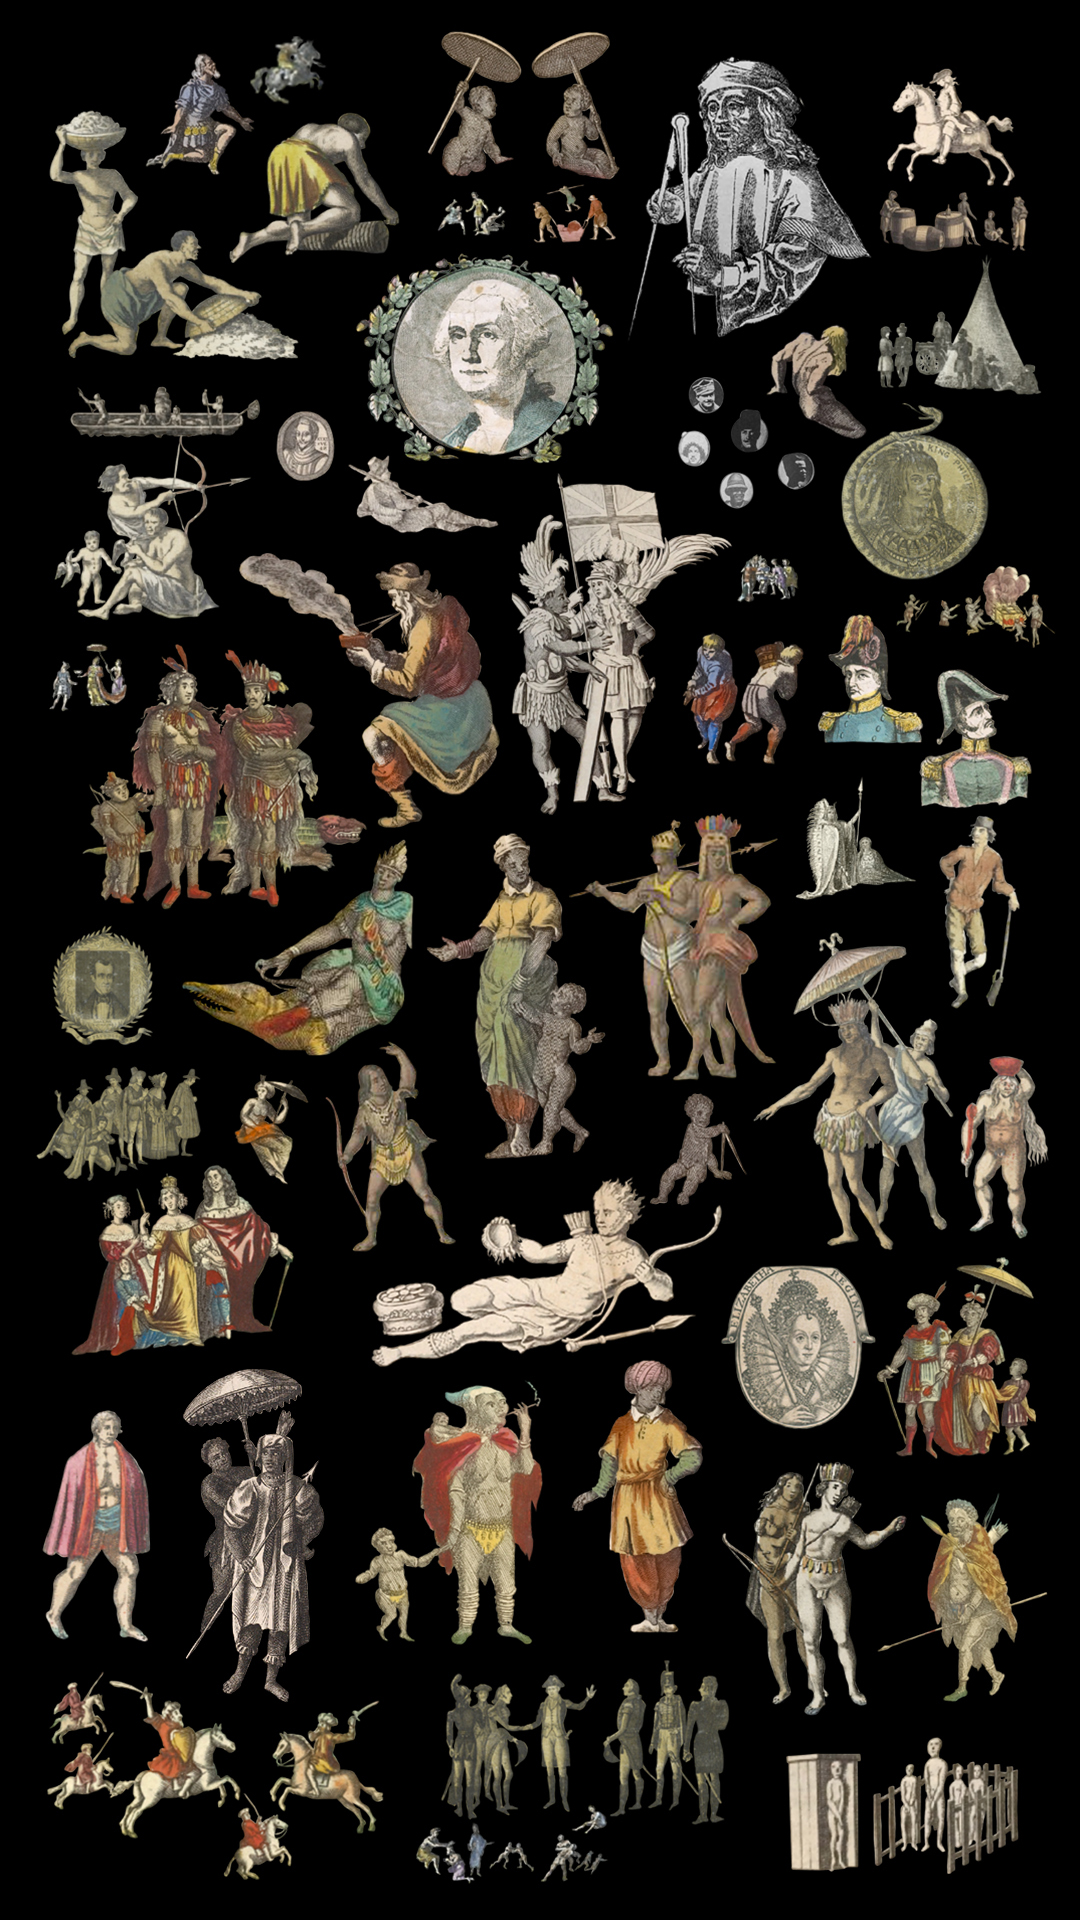 A collage of cutouts against a black backdrop, showing depiction of royalty, pilgrims, natives, people on horseback, and historical figures like George Washington and Queen Elizabeth